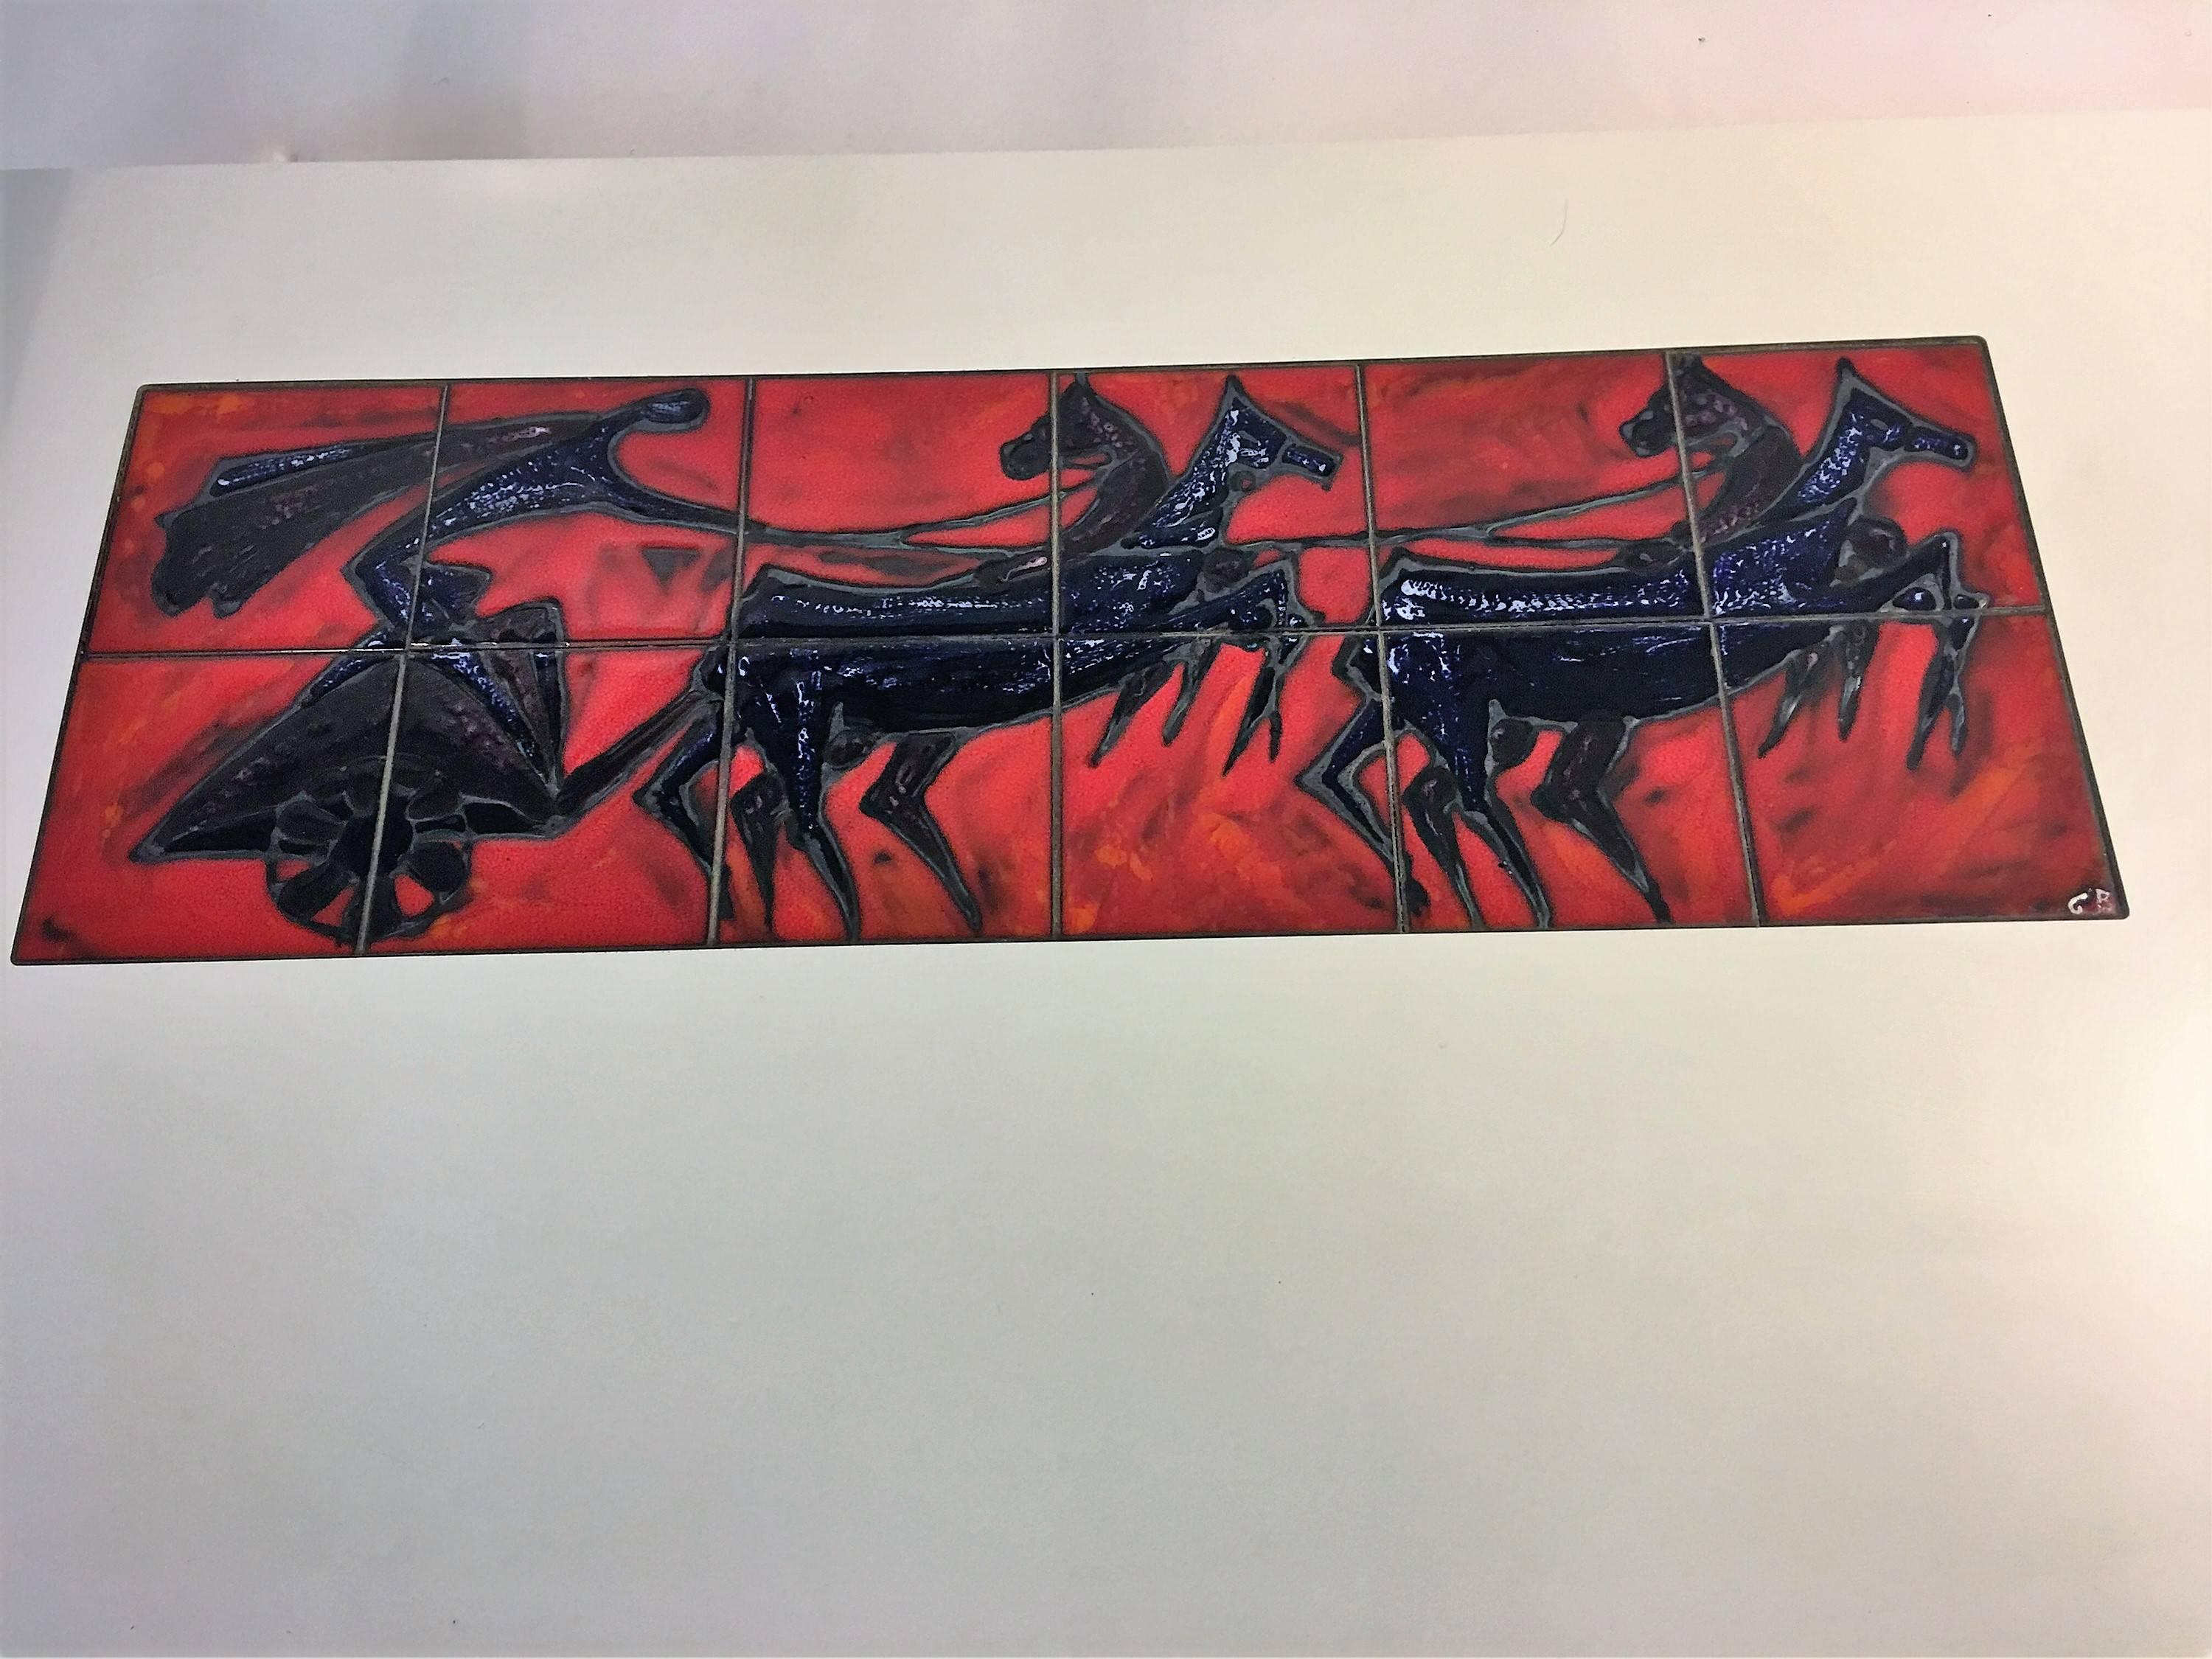 Gorgeous zig zag chrome frame coffee table with inset handmade vibrant red tile scene of modernist horse drawn chariot. The lower tier is a white laminate with rosewood trim sides. The thick glass rectangular top rests in the top frame. Measures: